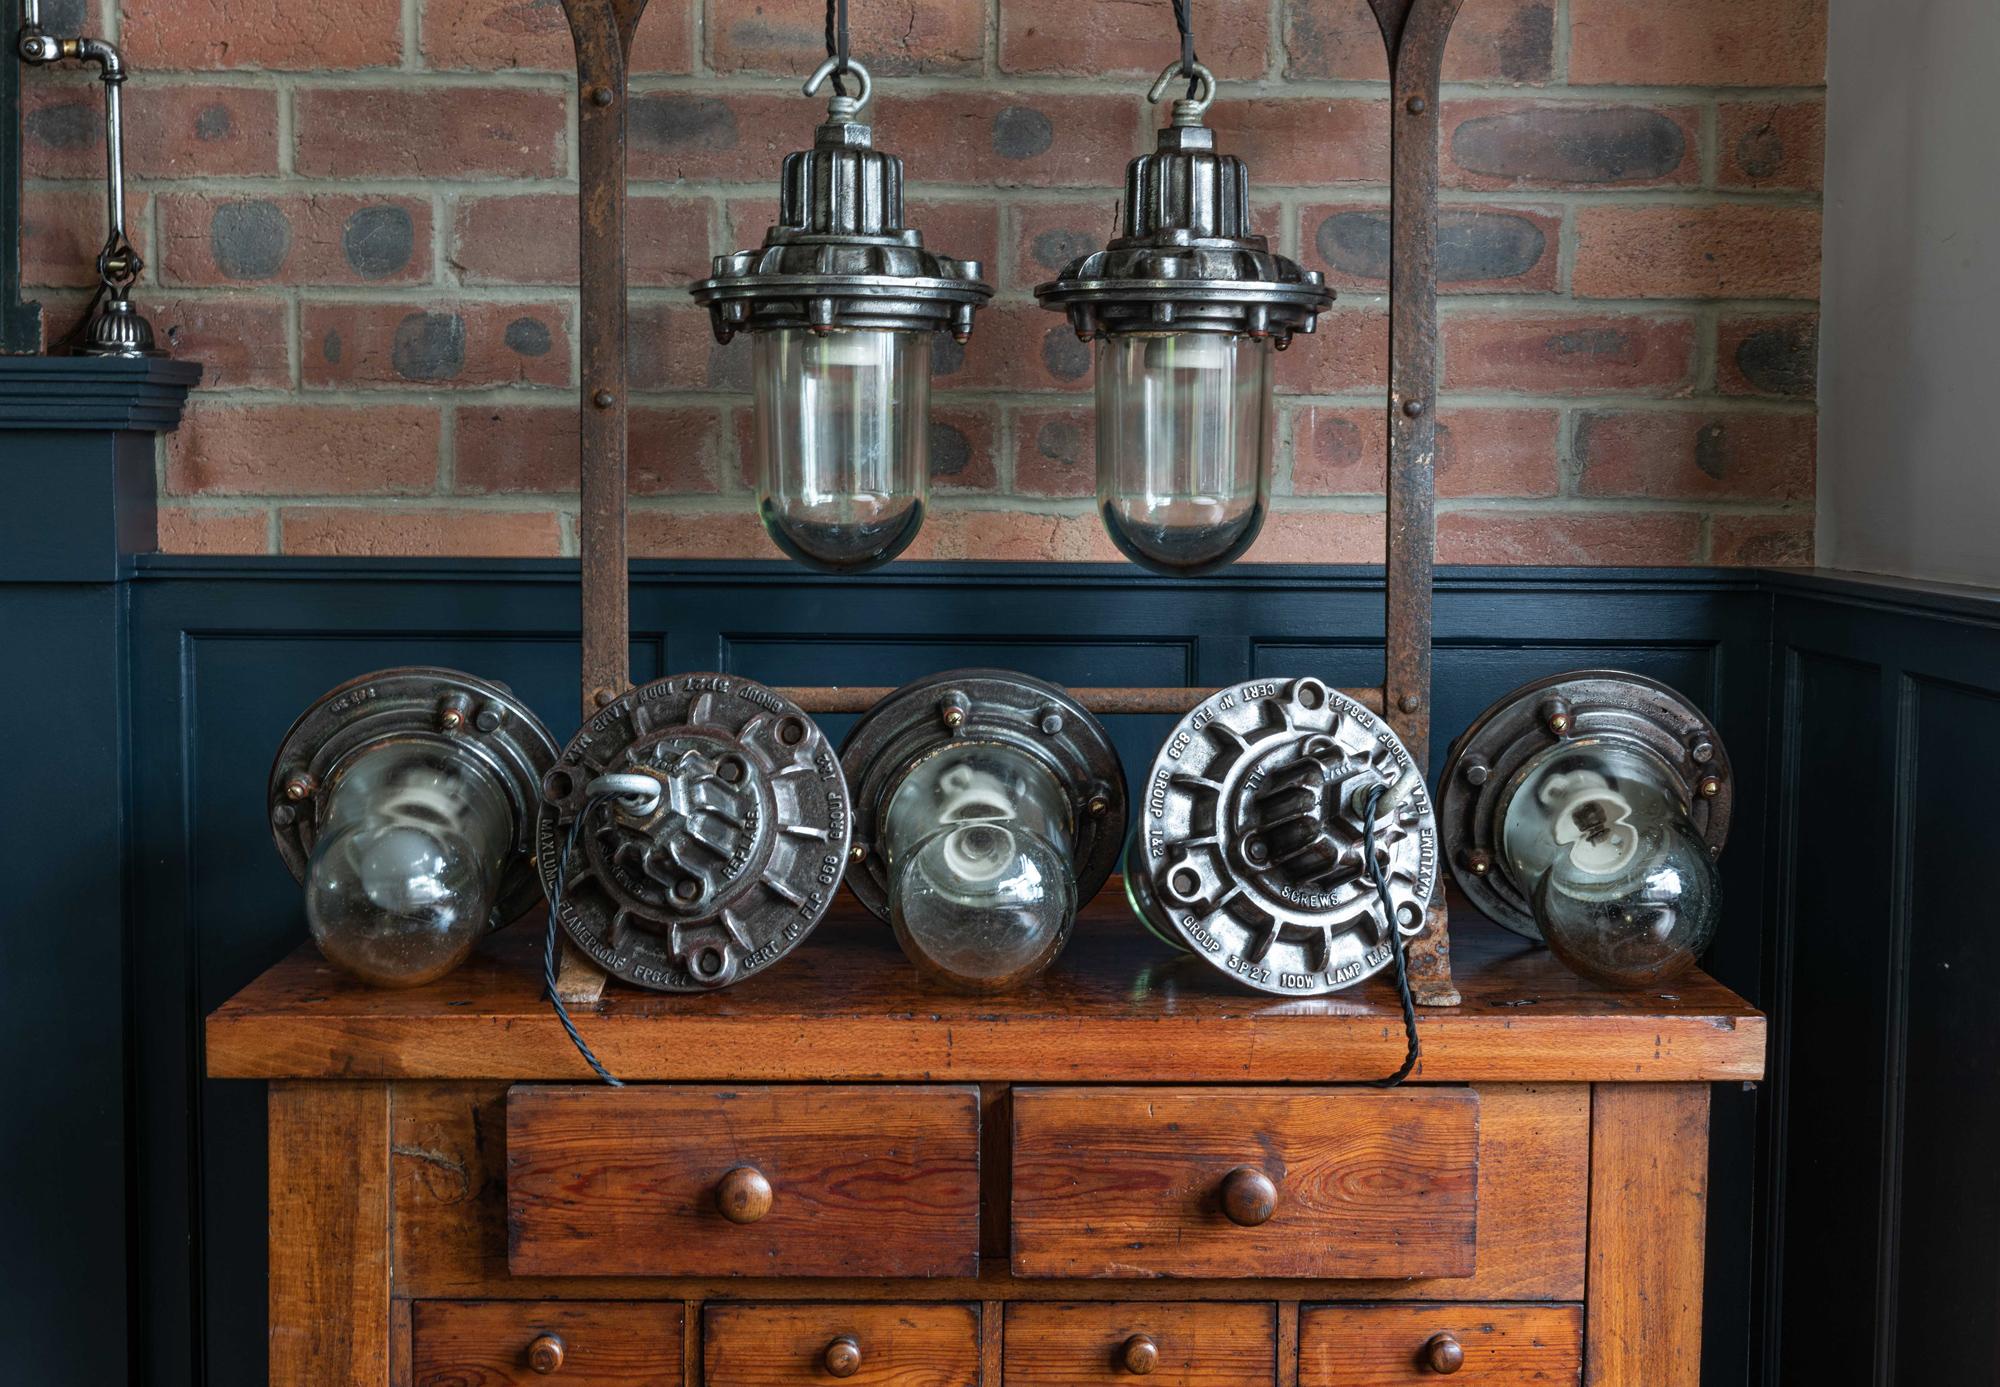 English polished cast iron Factory 'Maxlume' flameproof pendants, circa 1950.
Lightly polished cast iron with thick glass dome shades and original ceramic bulb holders.
Rewired with 2m of 3 core black flex.

Measures: Height 40, diameter 20 cm.